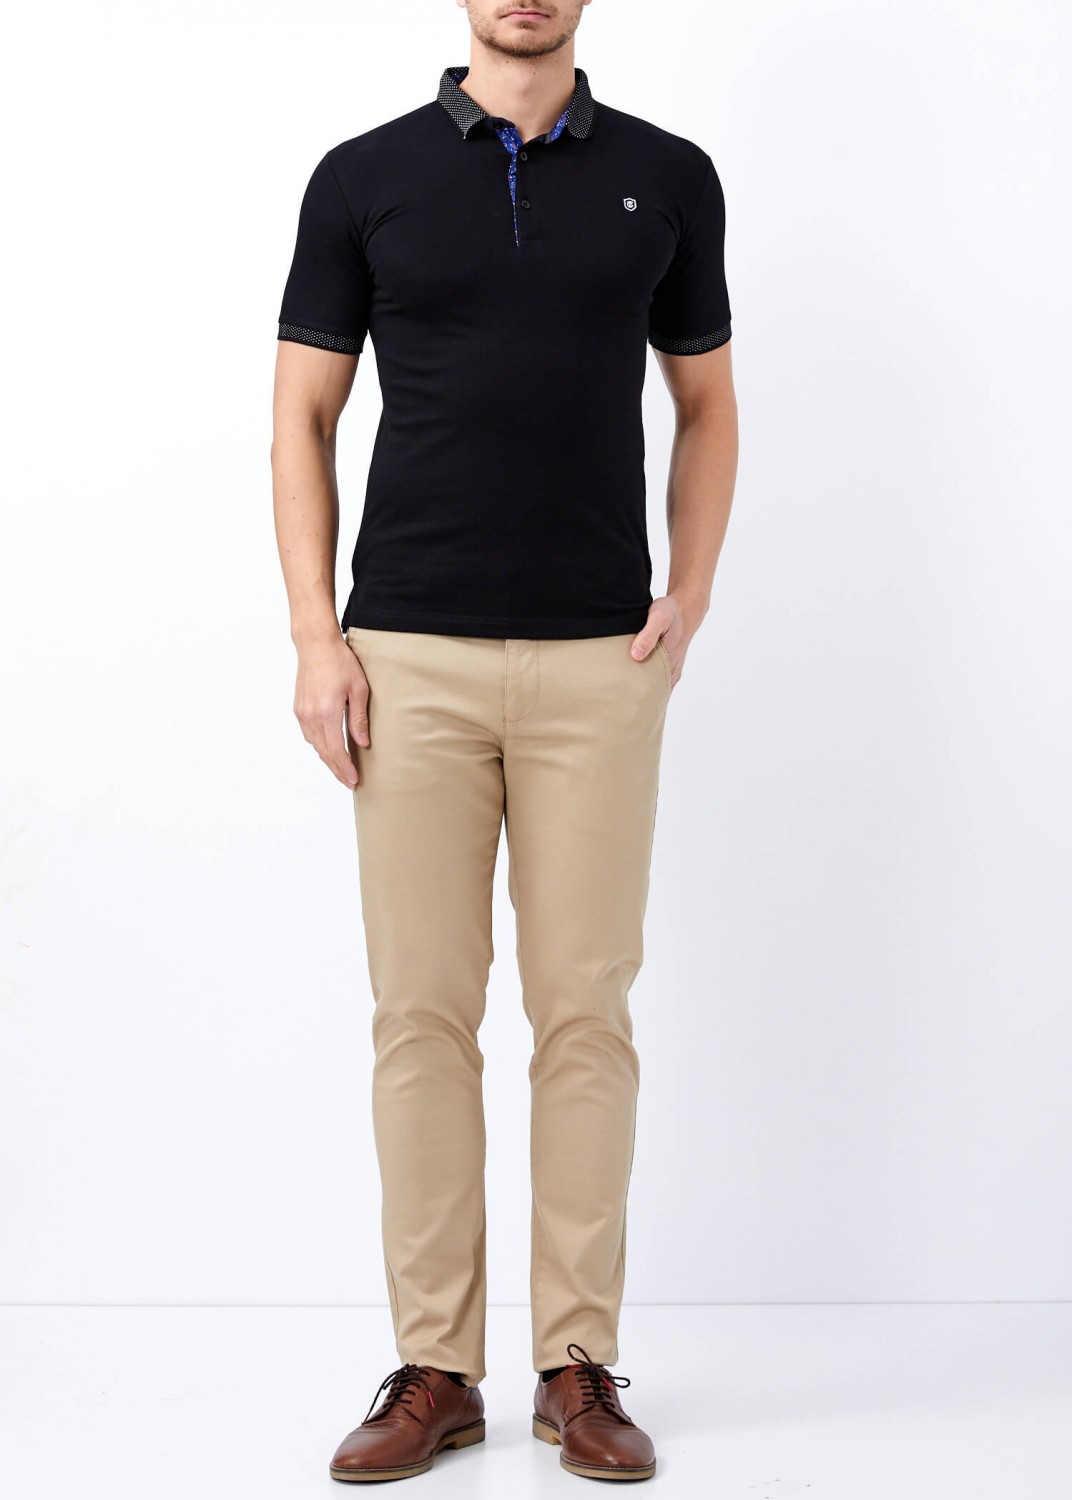 polo tee slim fit